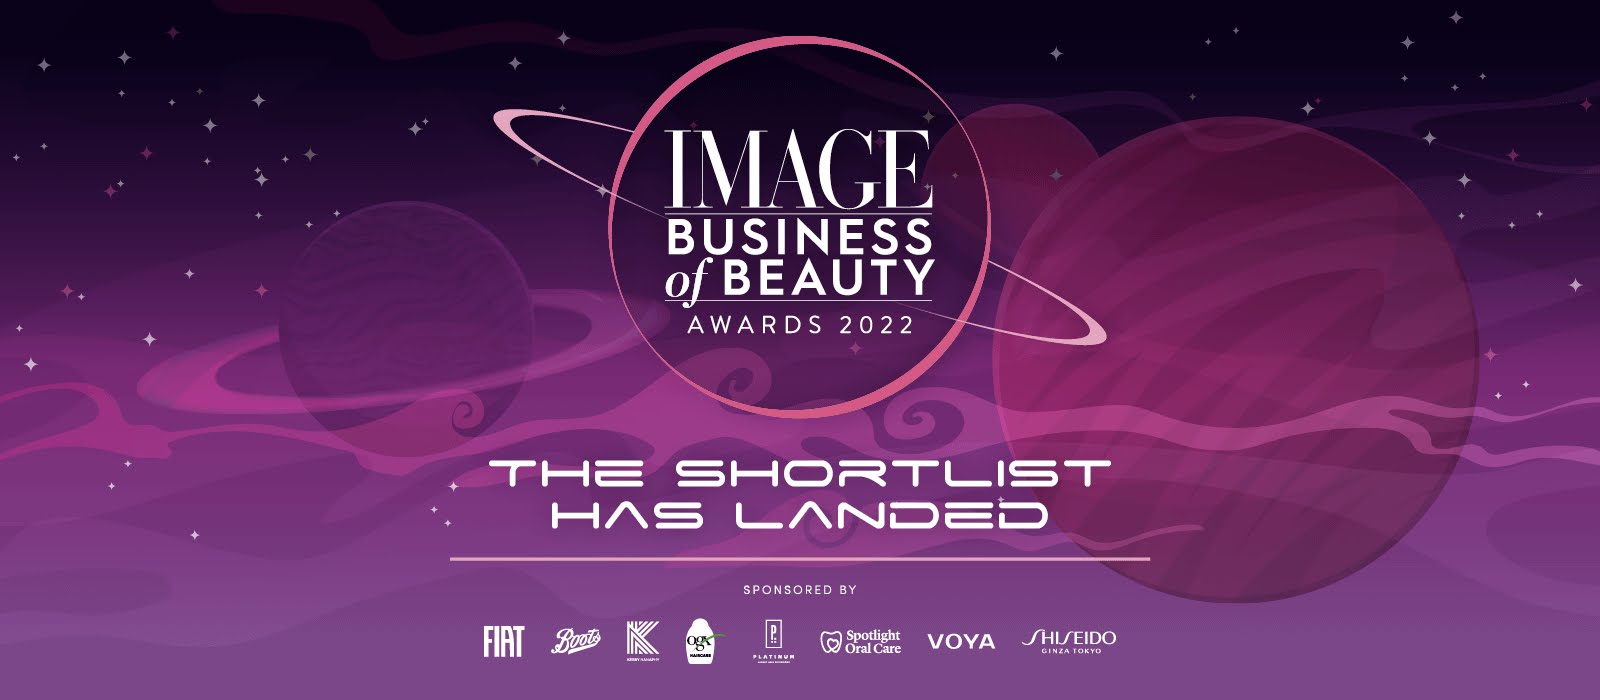 The IMAGE Business of Beauty Awards 2022 shortlist has landed!